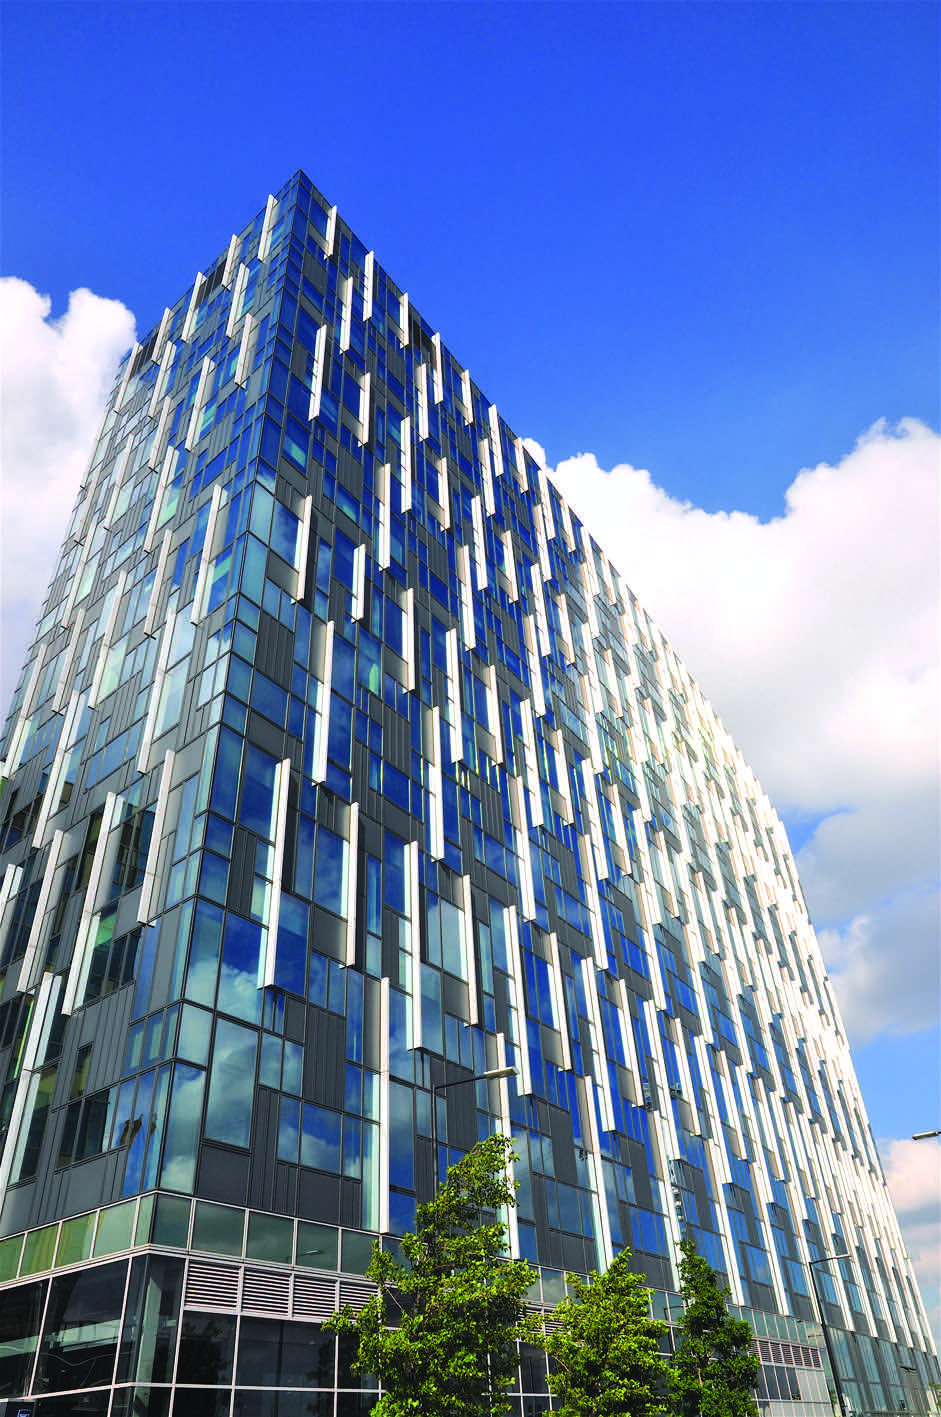 Cost model – commercial offices, central London - CIBSE Journal